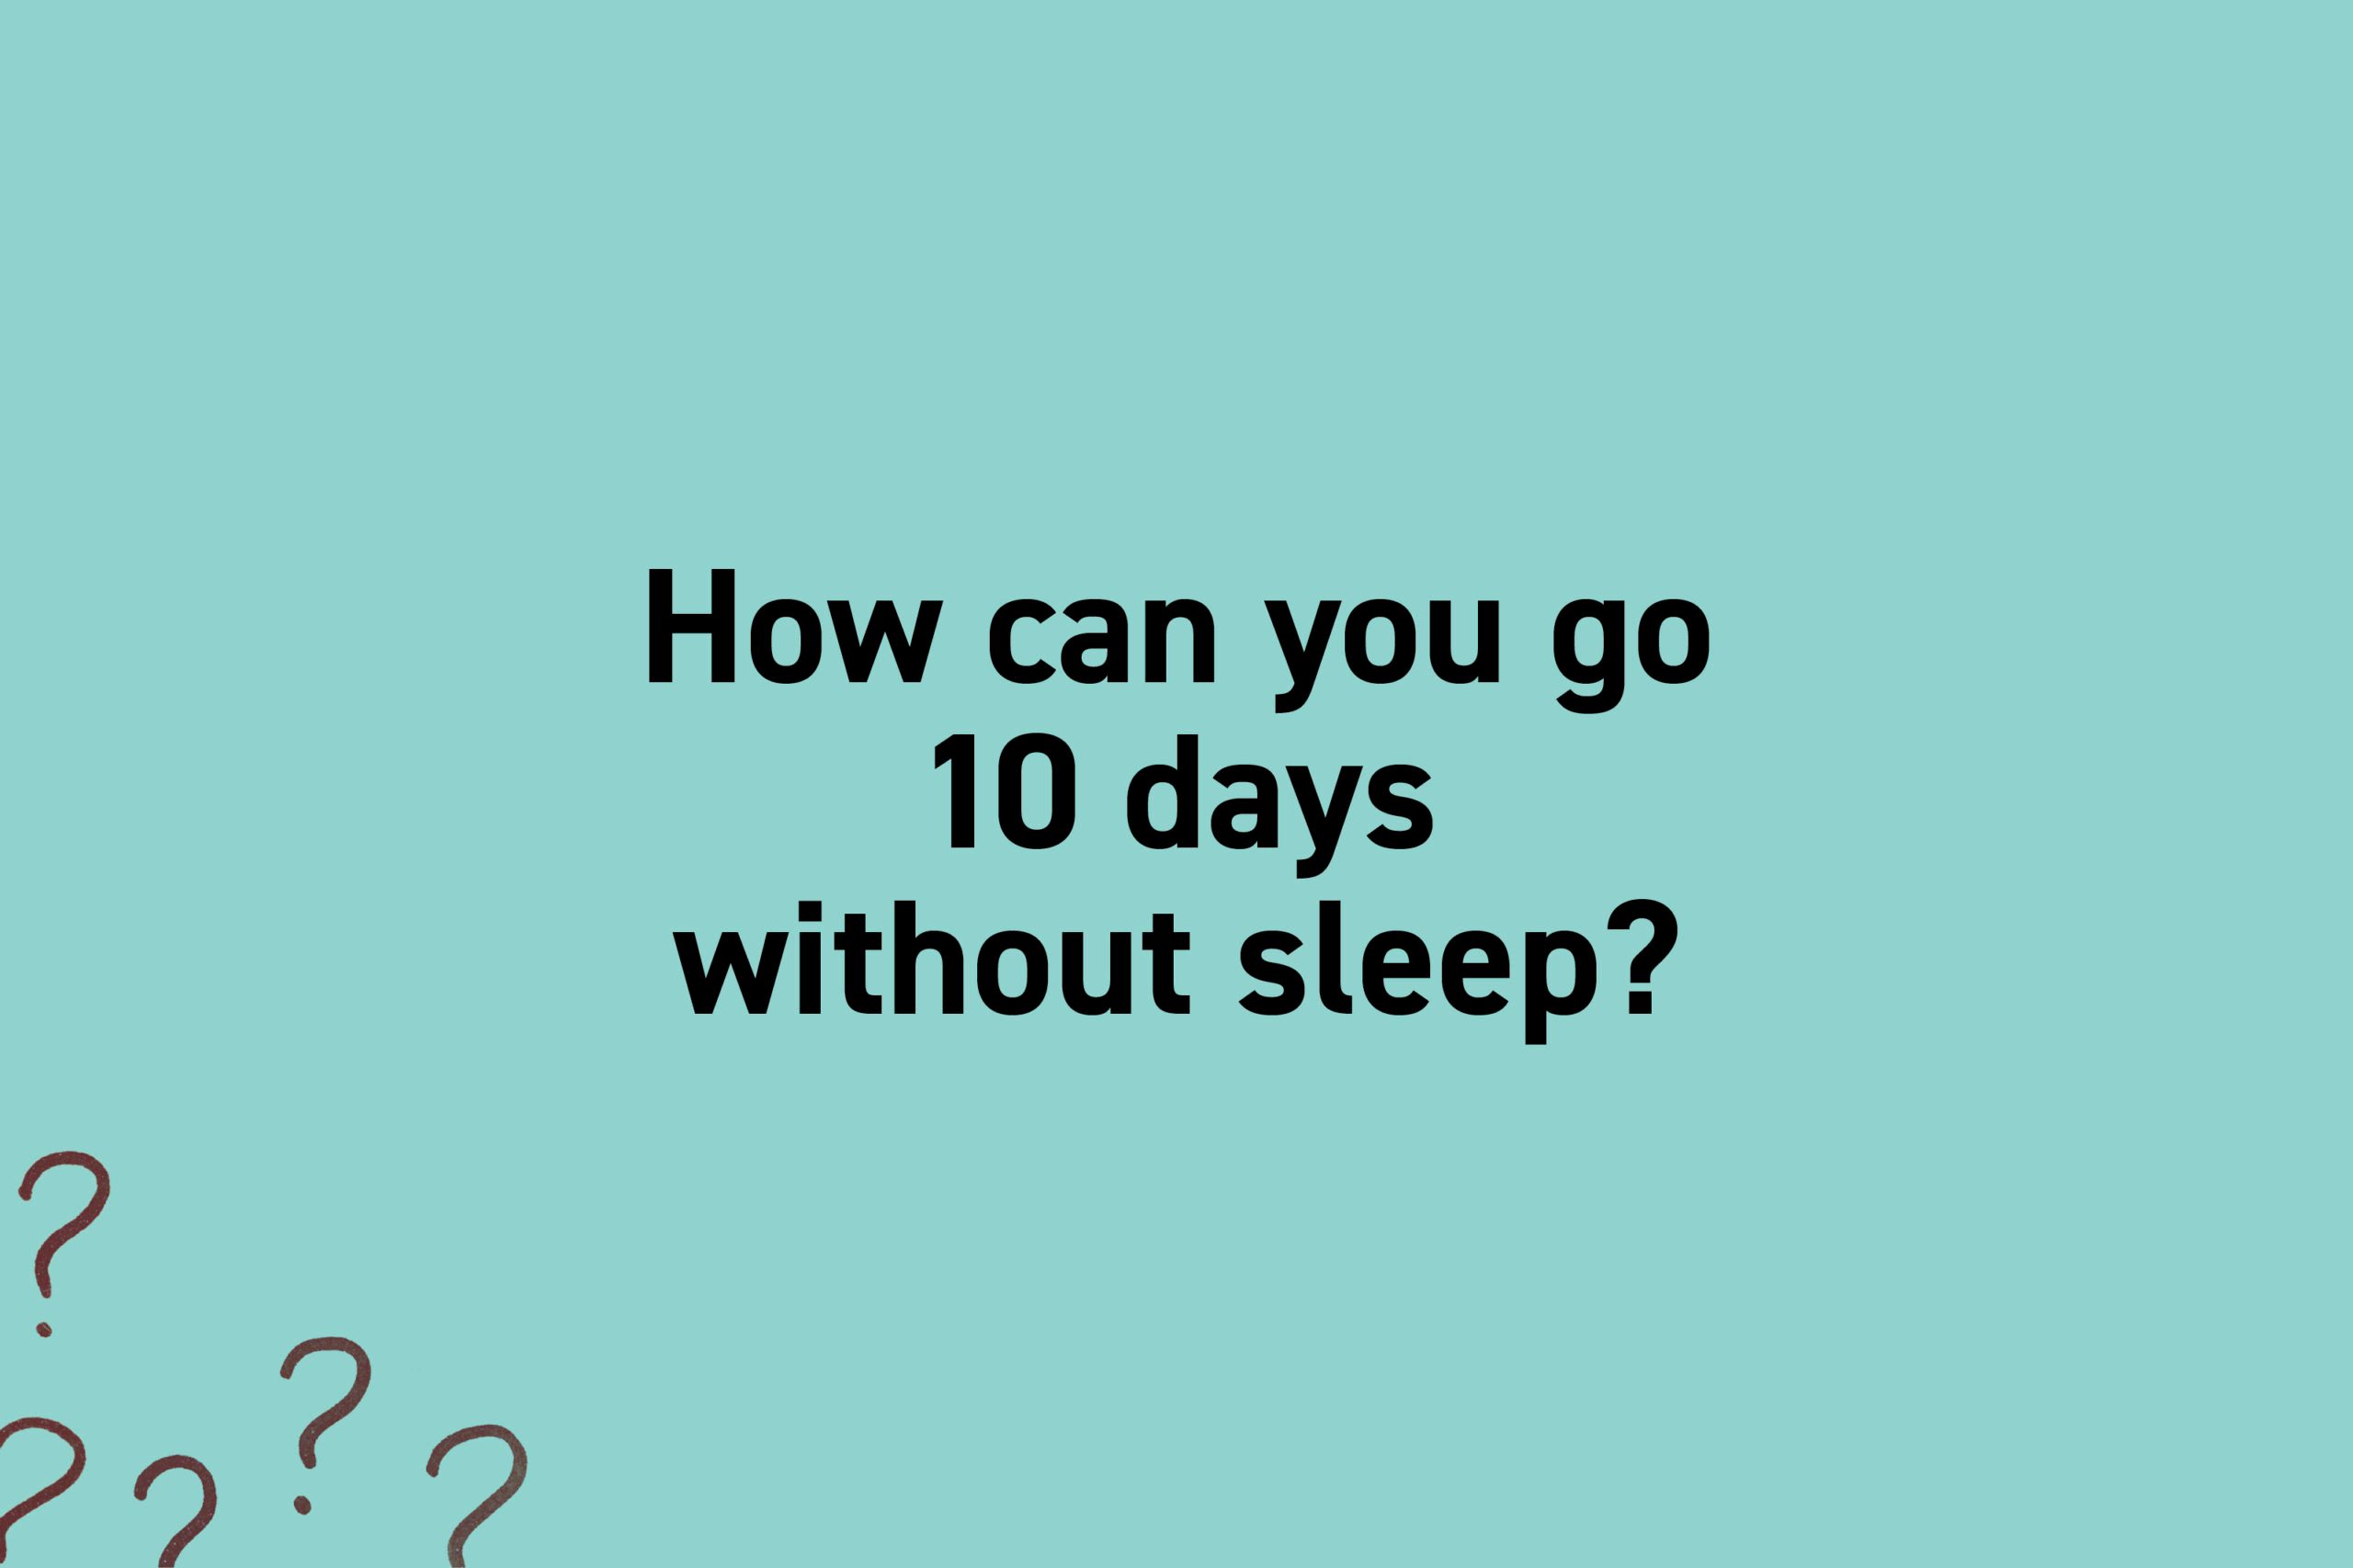 How can you go 10 days without sleep?